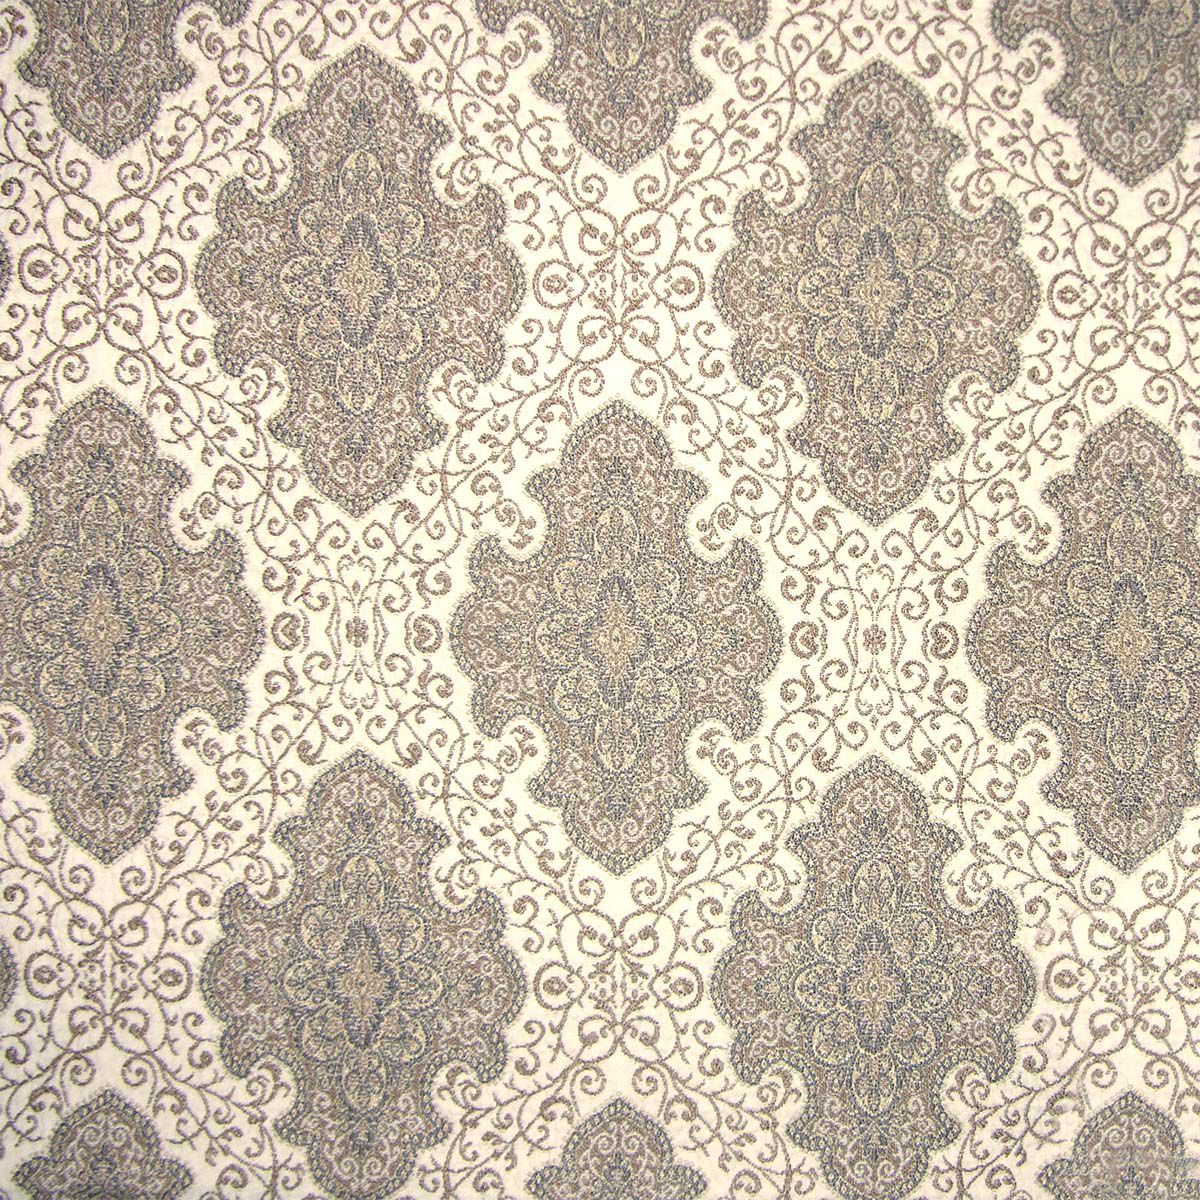 Amaya fabric in ivory multi color - pattern number VW 0003F013 - by Scalamandre in the Old World Weavers collection